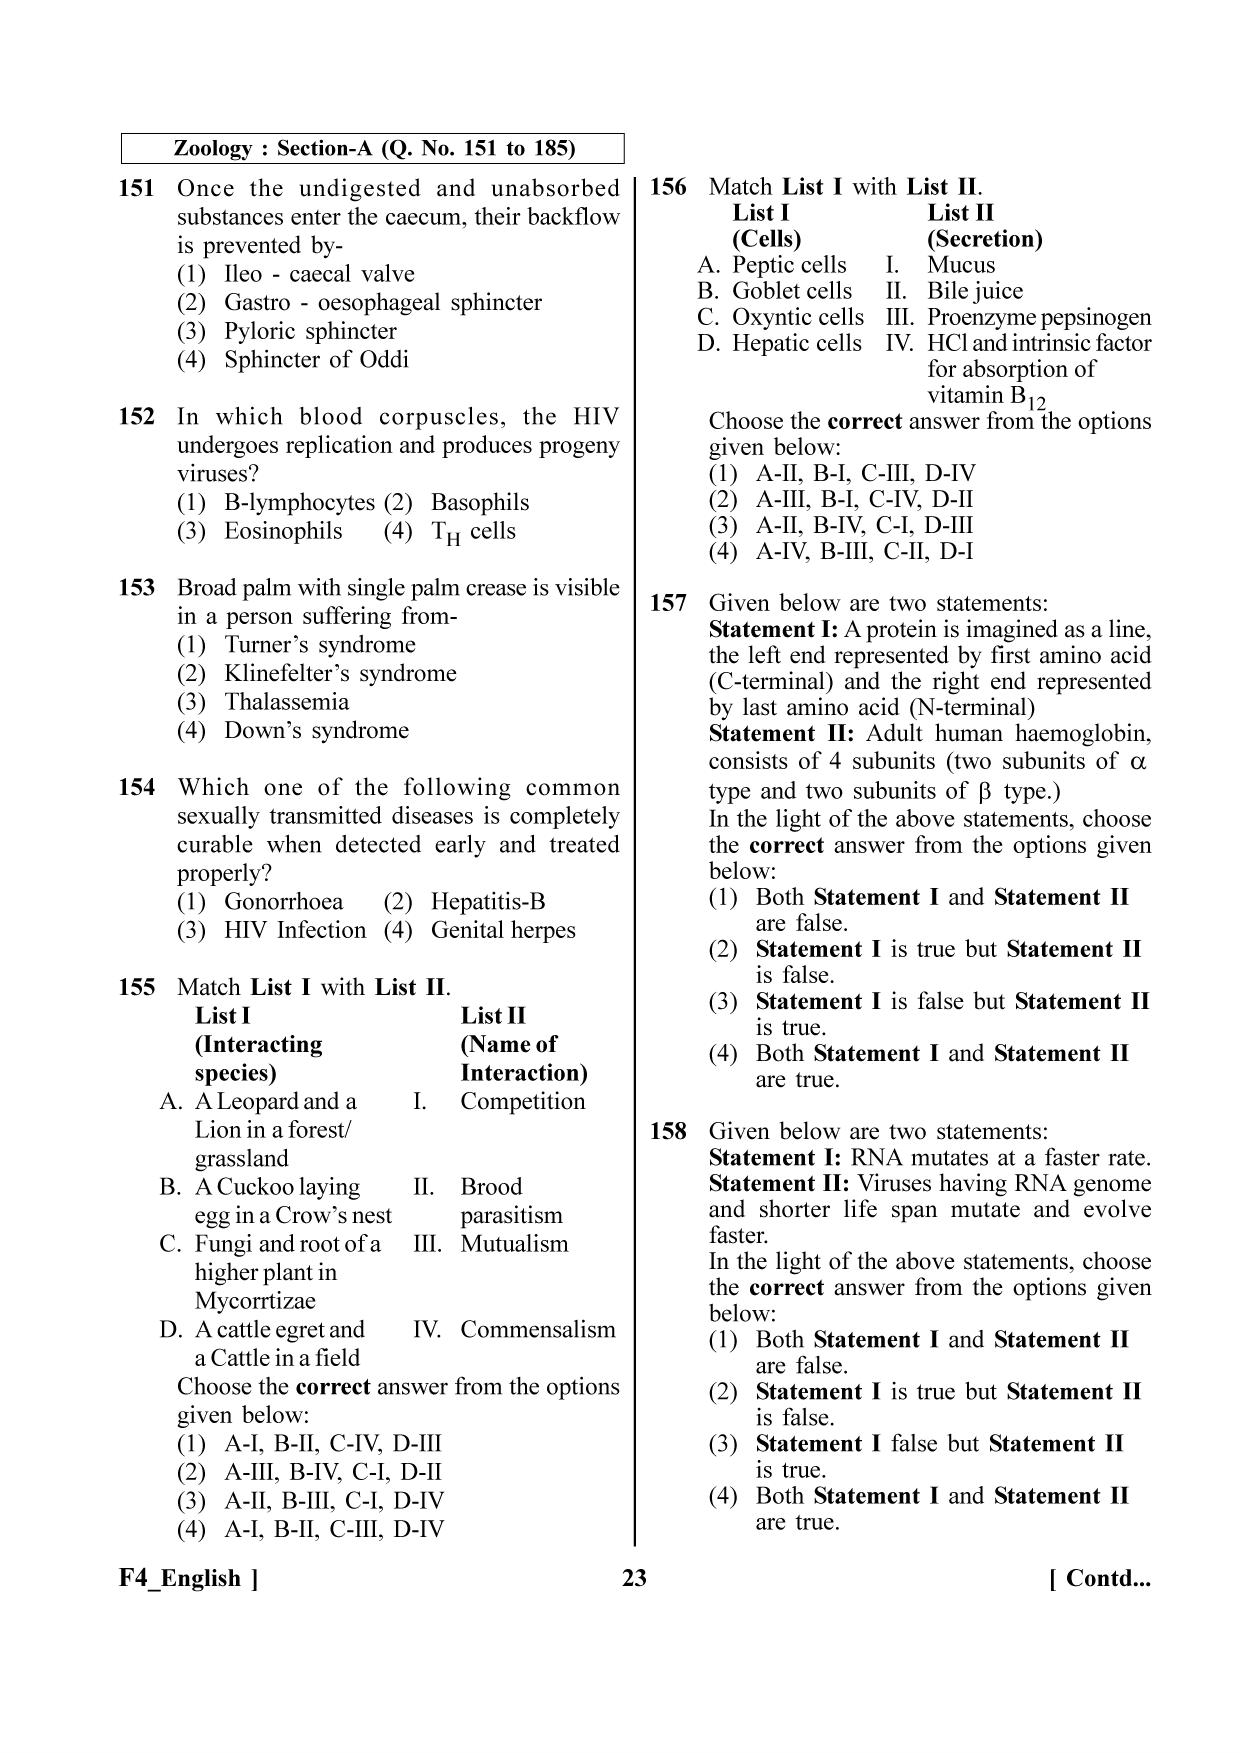 NEET 2023 F4 Question Paper - Page 23